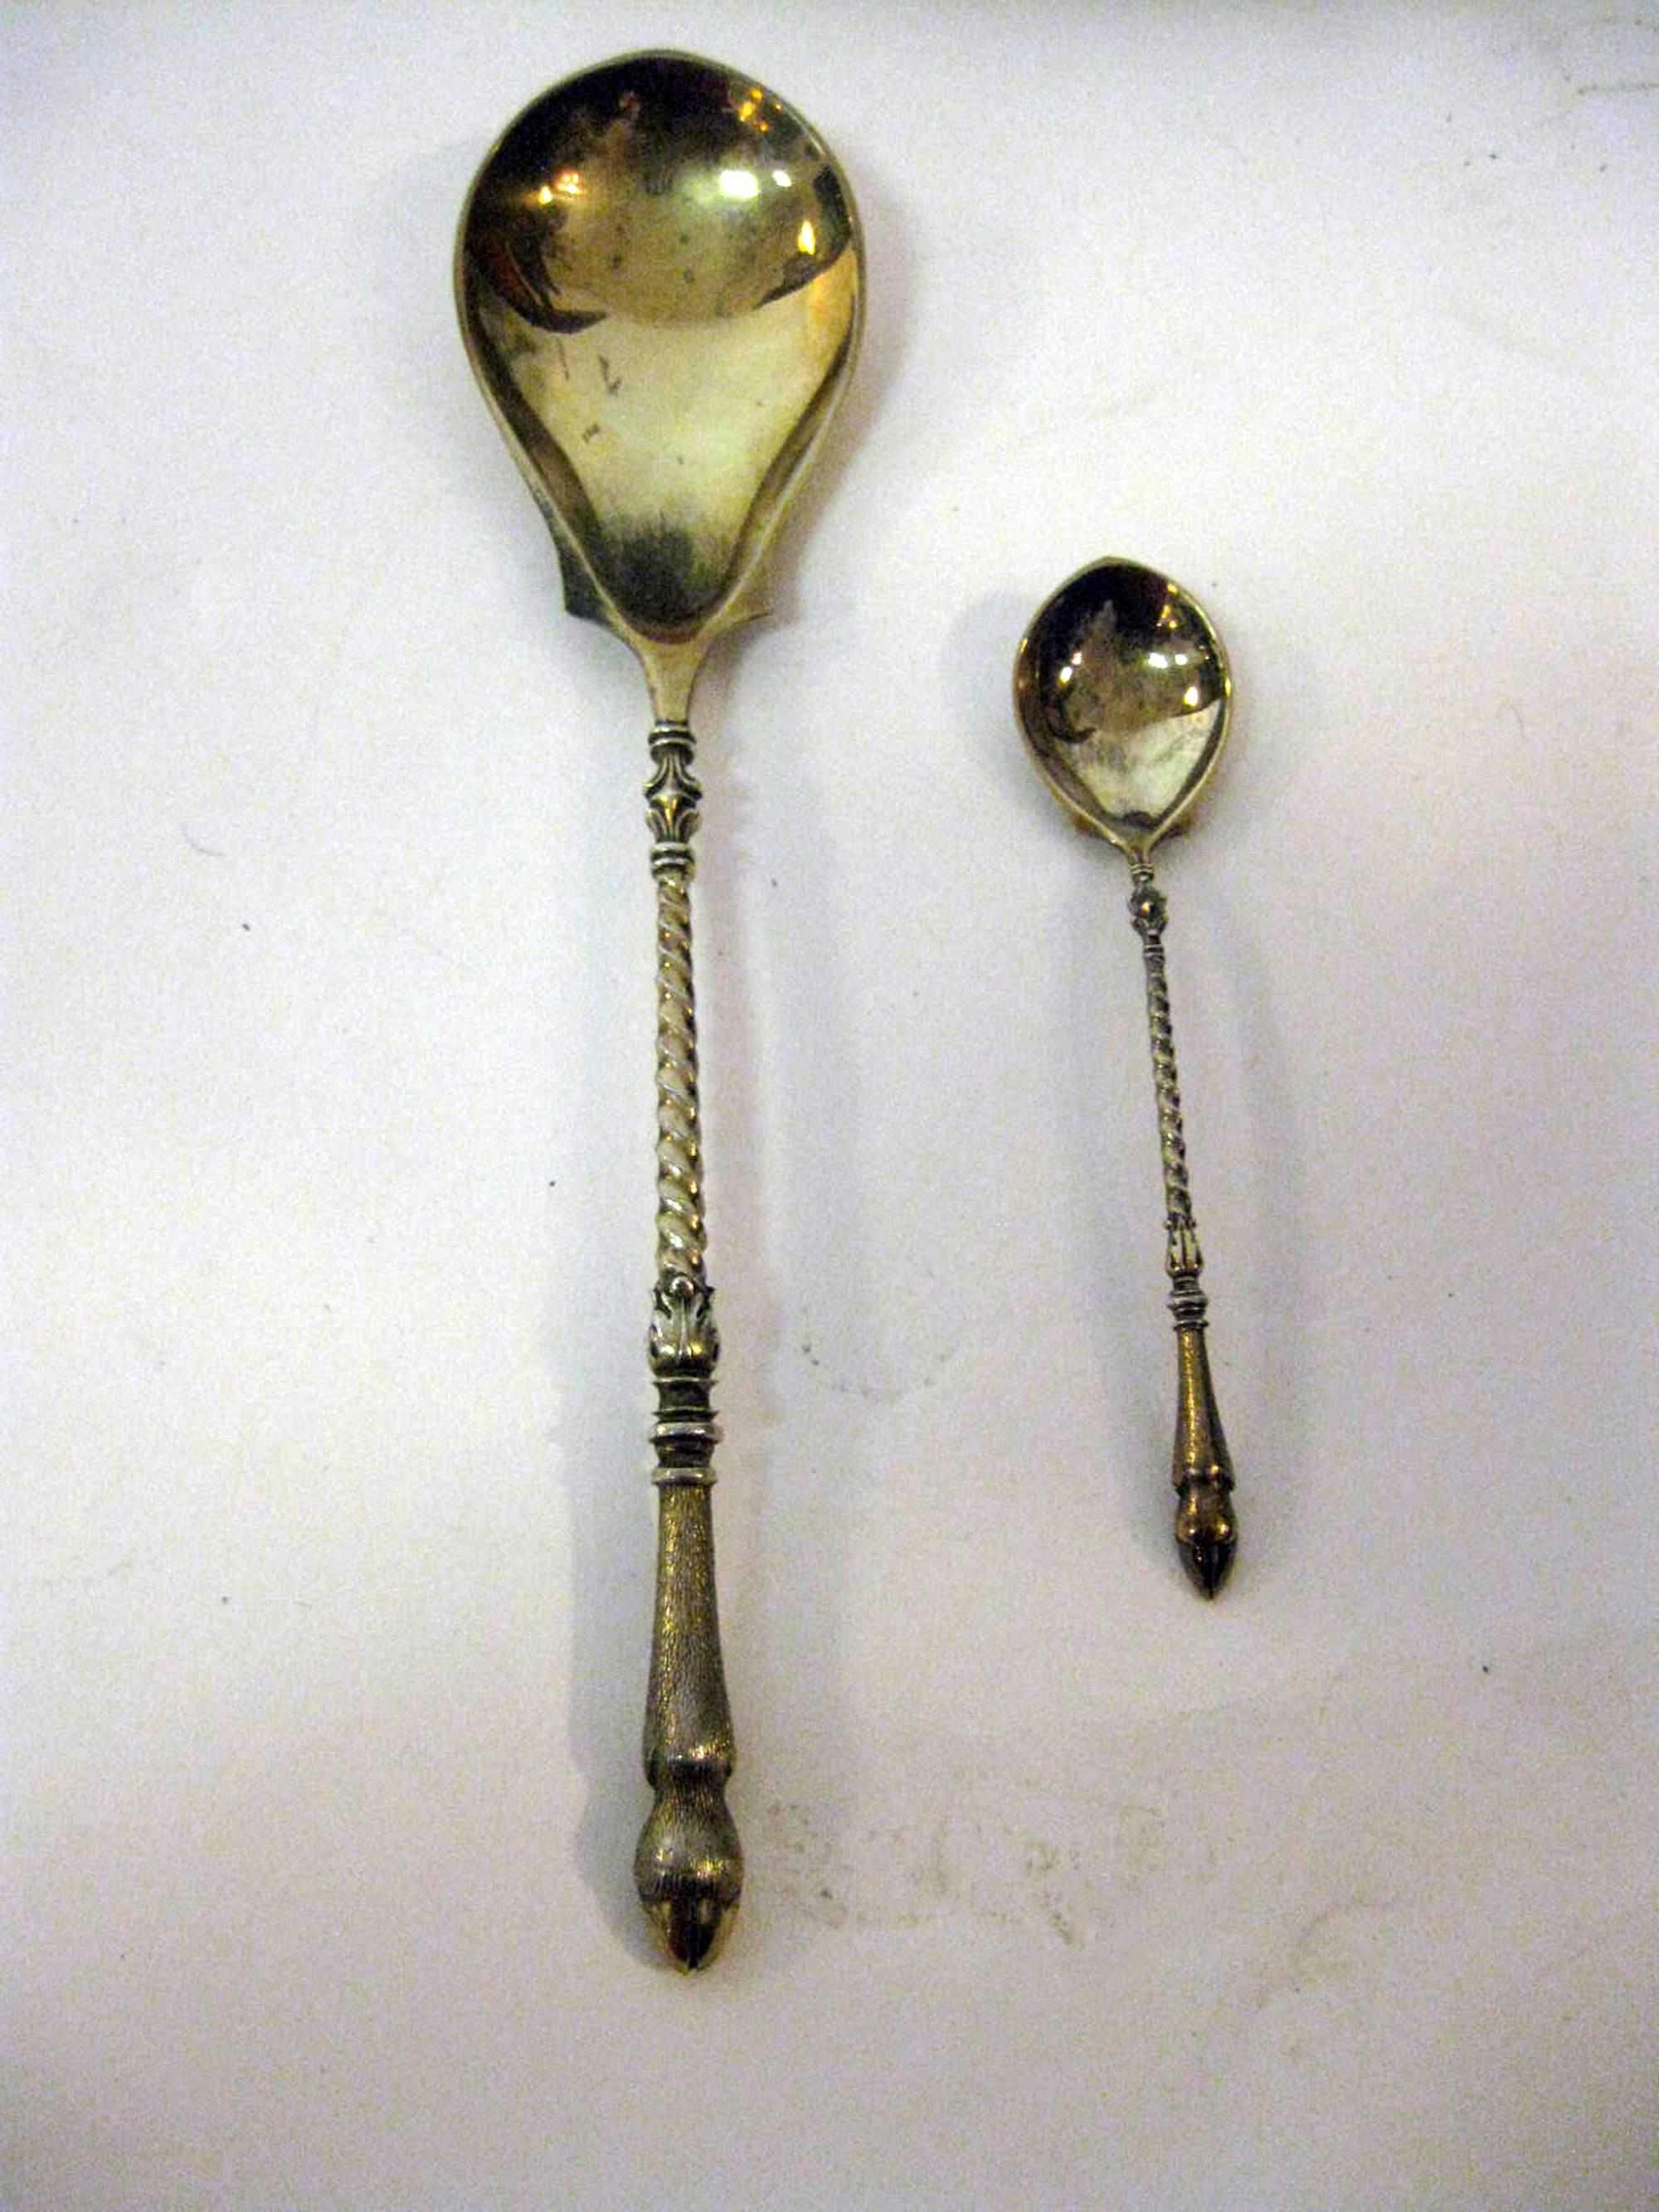 Serving set consisting of one large and eighteen small spoons. The large spoon is marked Humbert & Sohn with I 800 and a crescent moon, the smaller spoons I 800.  Jean Georges Humbert & Sohn Georges 1802-1863 was located in Berlin,and was jeweler to